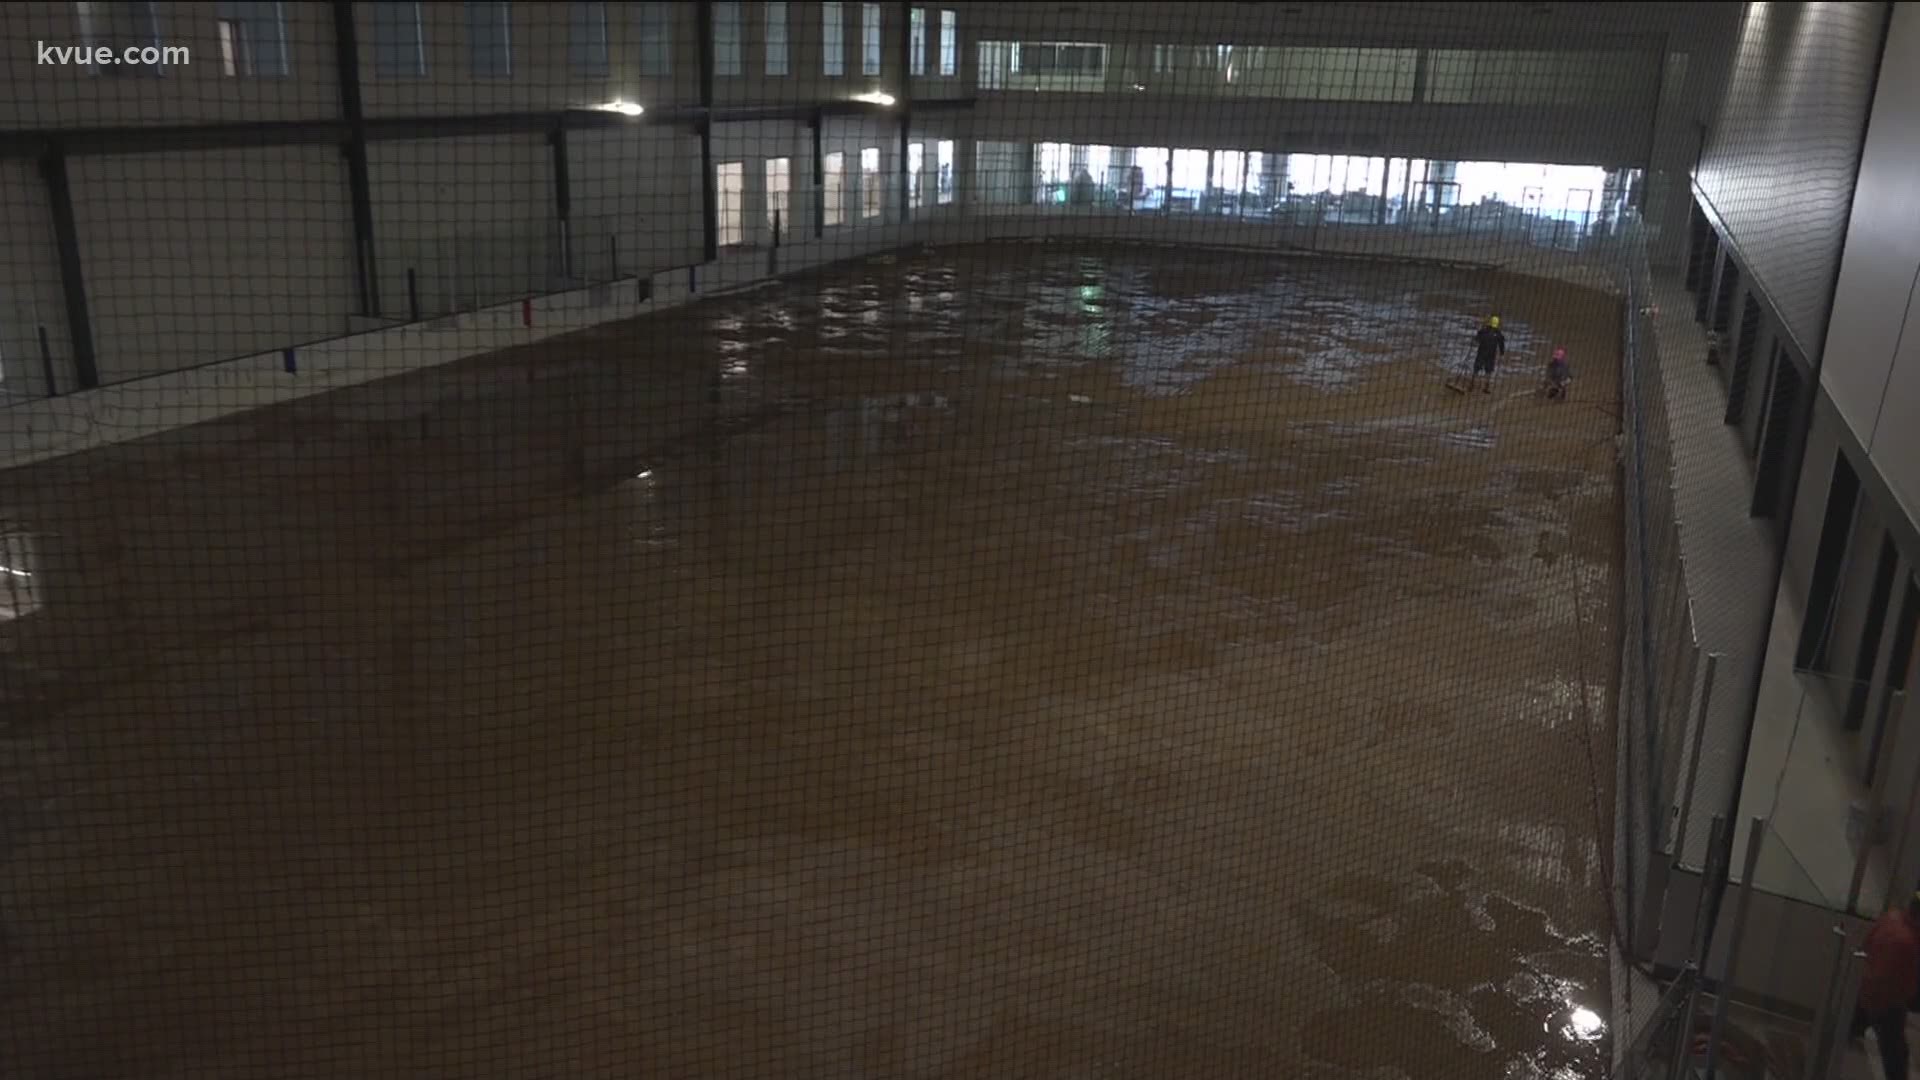 Construction crews started pouring water to make ice rinks at a new sports complex in Cedar Park.